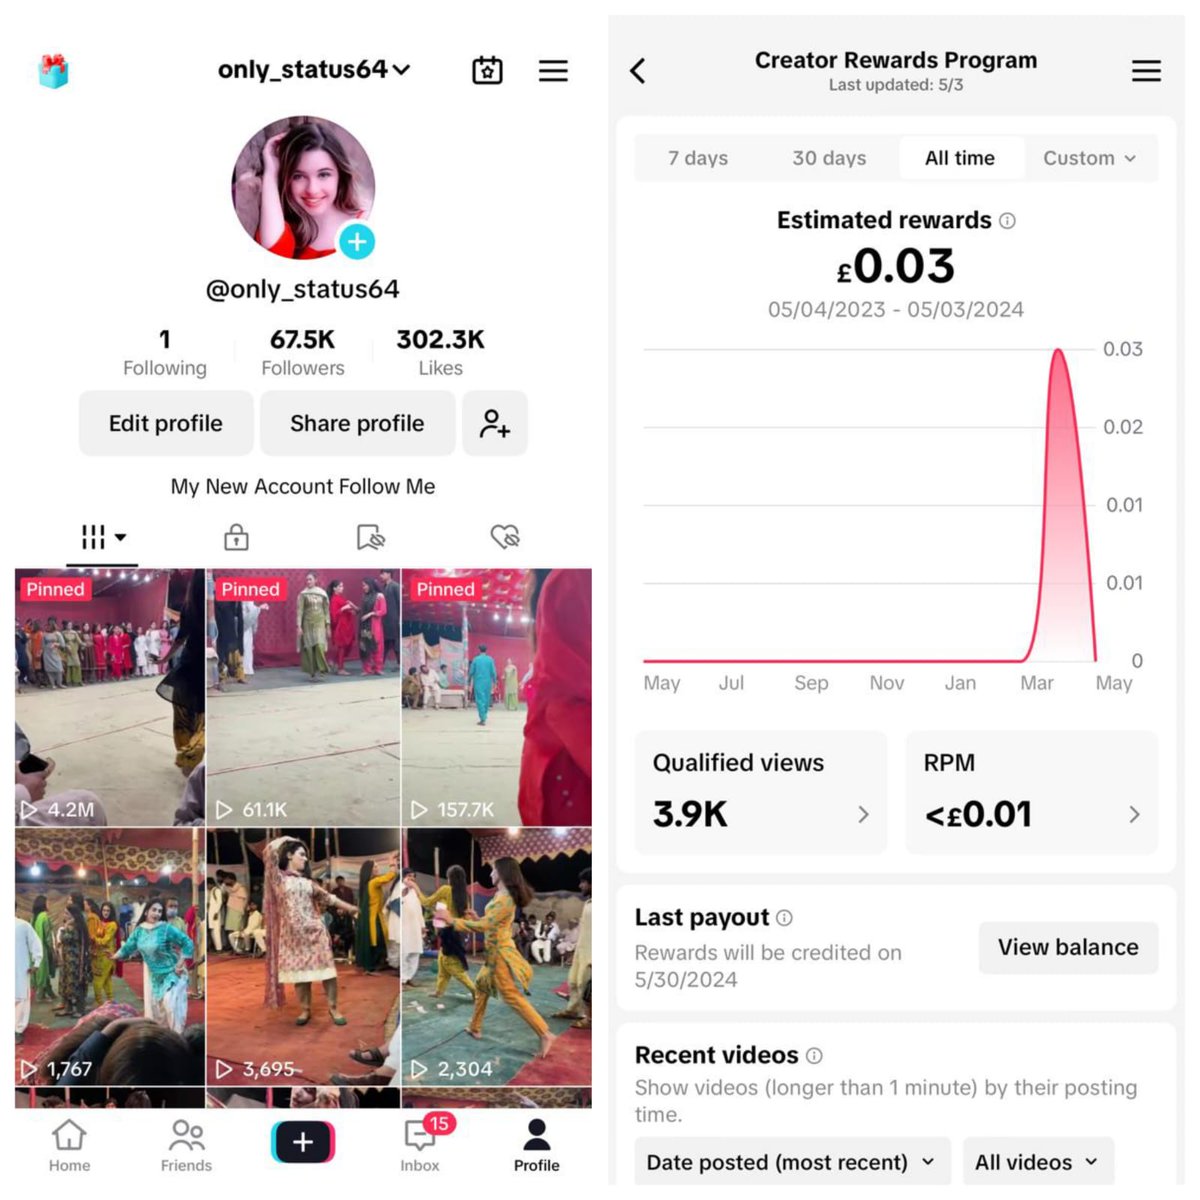 Uk base full Monetize tiktok account for sale only 25000 thousand mein
1mint plus vidoes dalo earning start...payment payoneer account mein